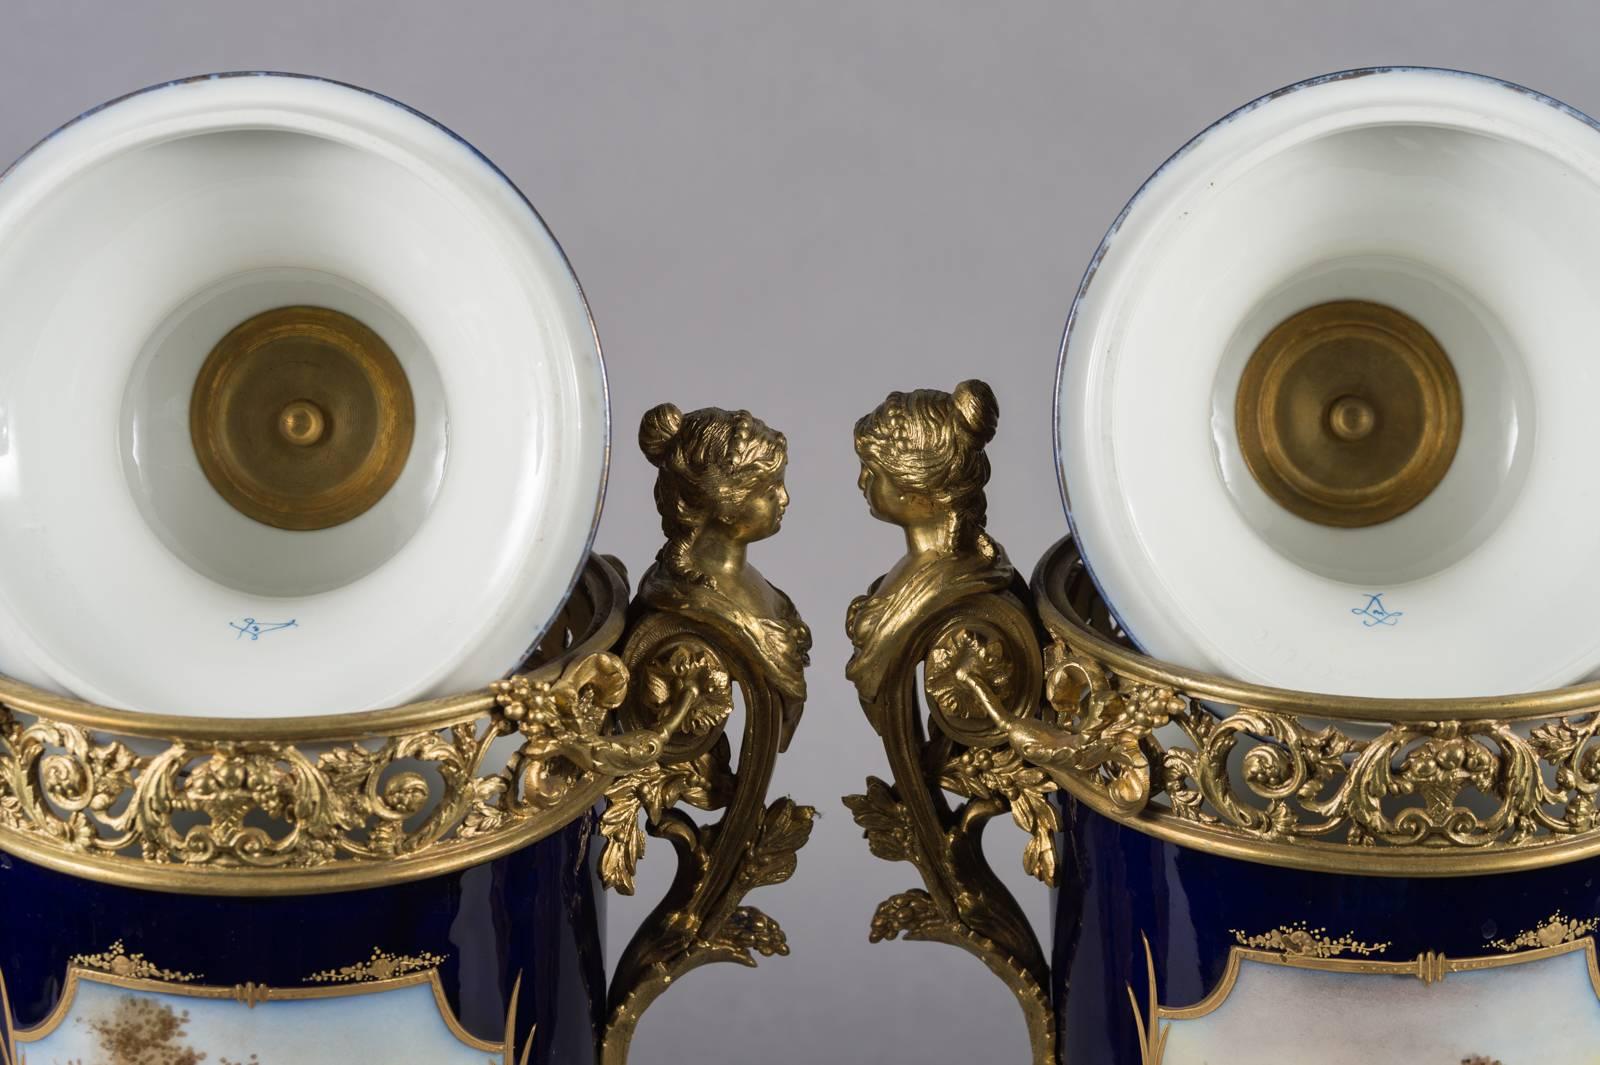 Pair of 19th Century French Sevres Gilt Bronze-Mounted Cobalt Blue Lidded Urns For Sale 3